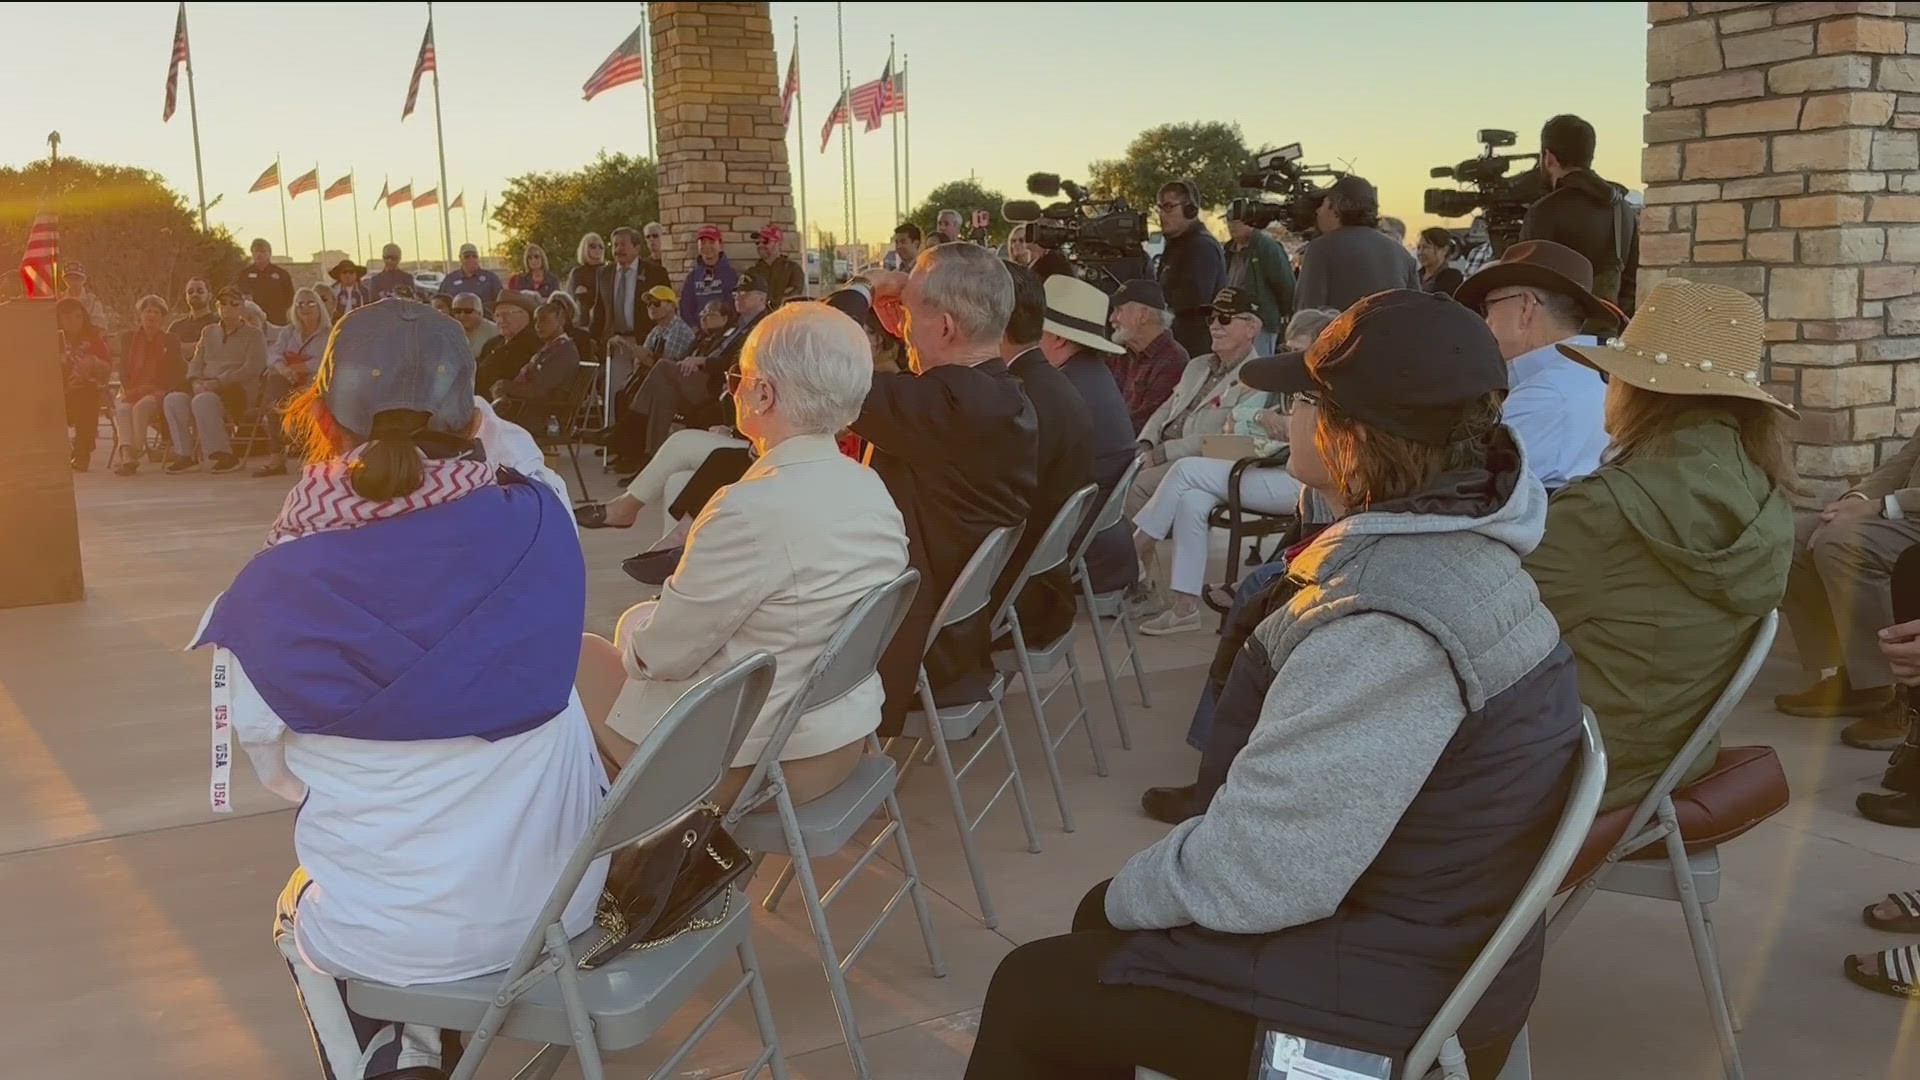 The ceremony honored those who served in the Vietnam War and those who were imprisoned during the war.